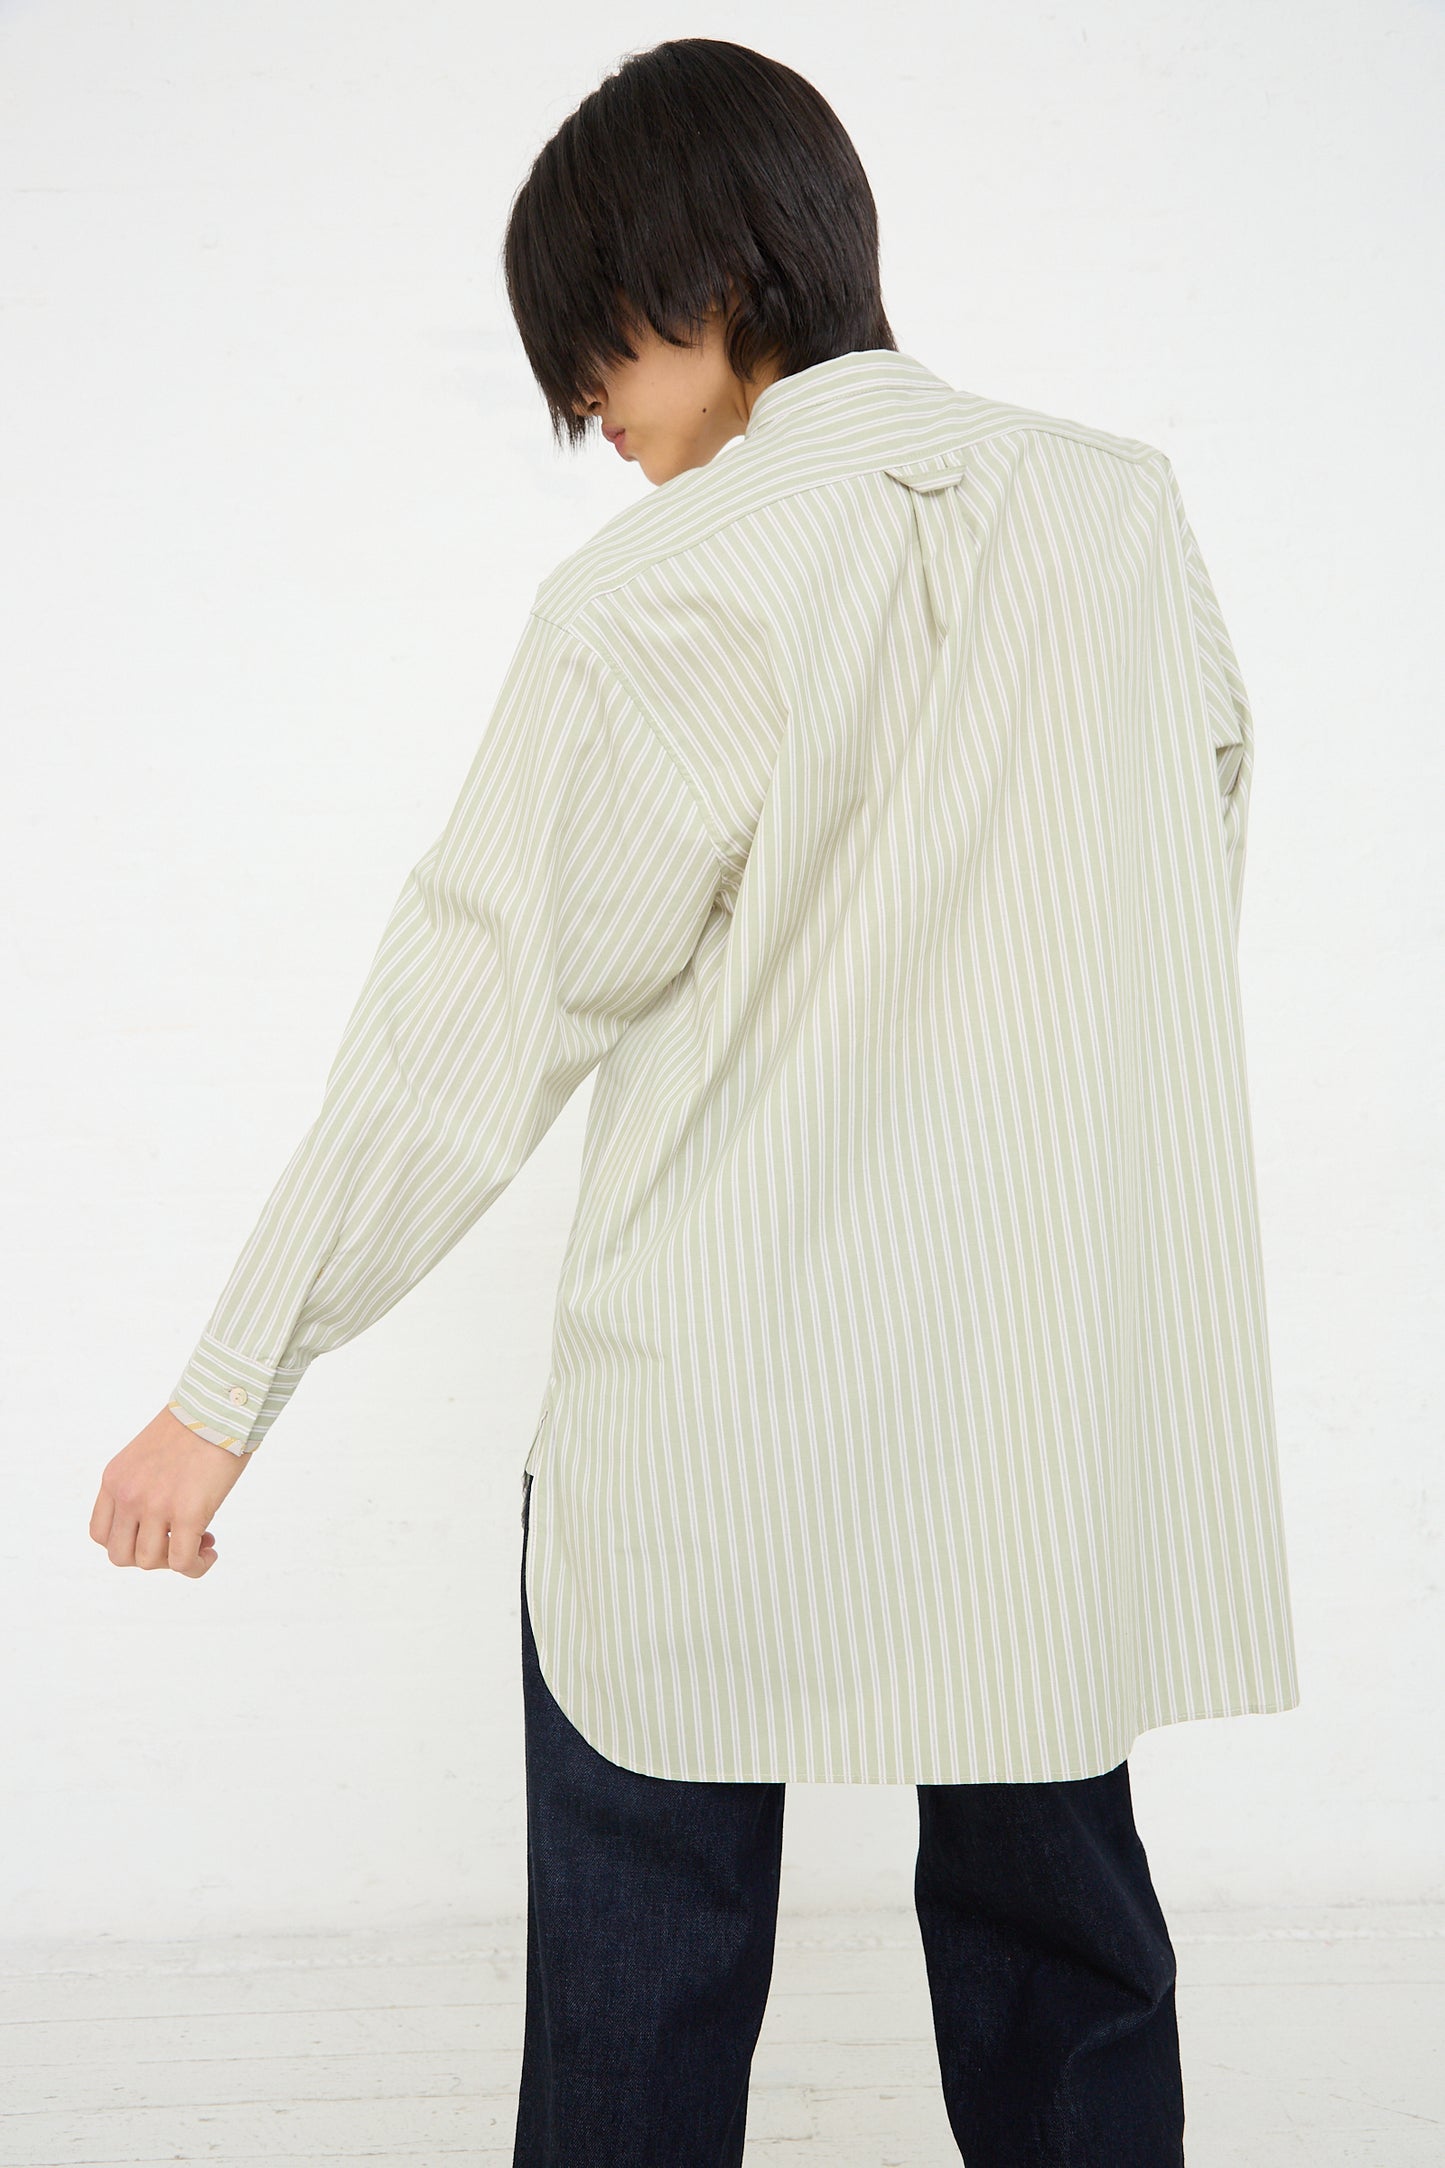 A person is seen from behind wearing a striped button-up shirt, crafted from British-manufactured cotton, with a vertical green and white pattern, standing against a white background. The shirt is the Japanese Cotton Ines Shirt in Mint and Ecru by Cawley.